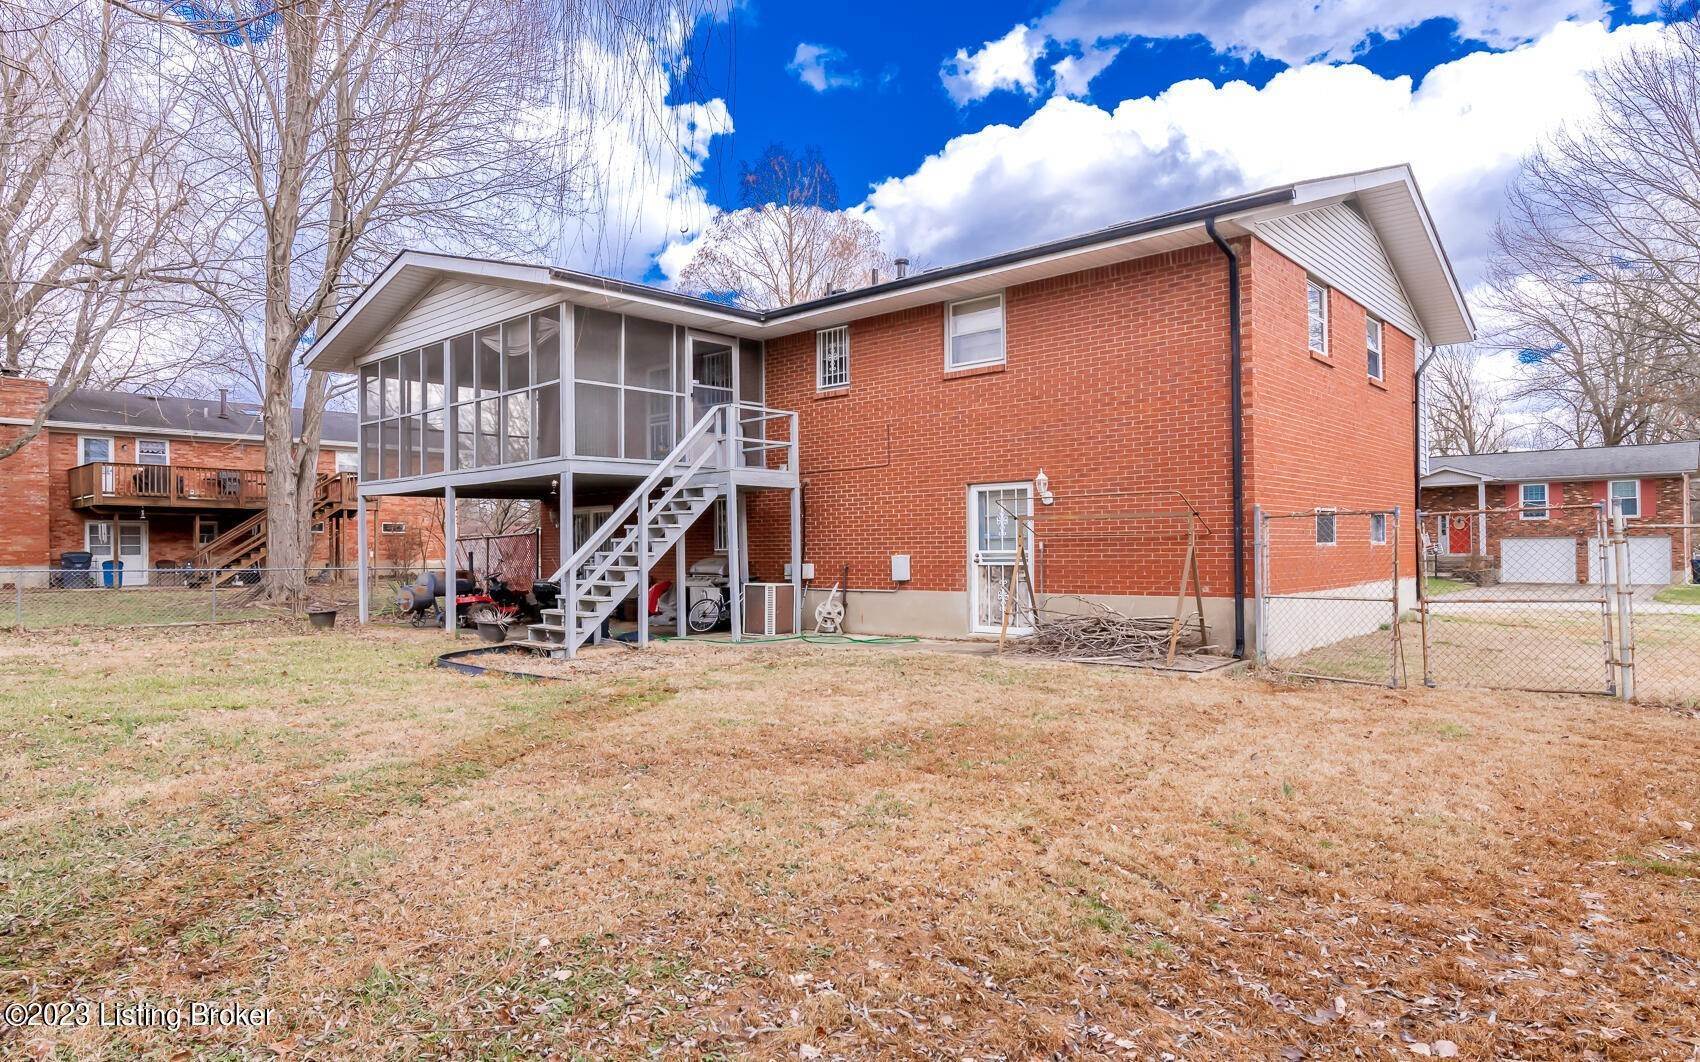 48. Single Family at Louisville, KY 40214